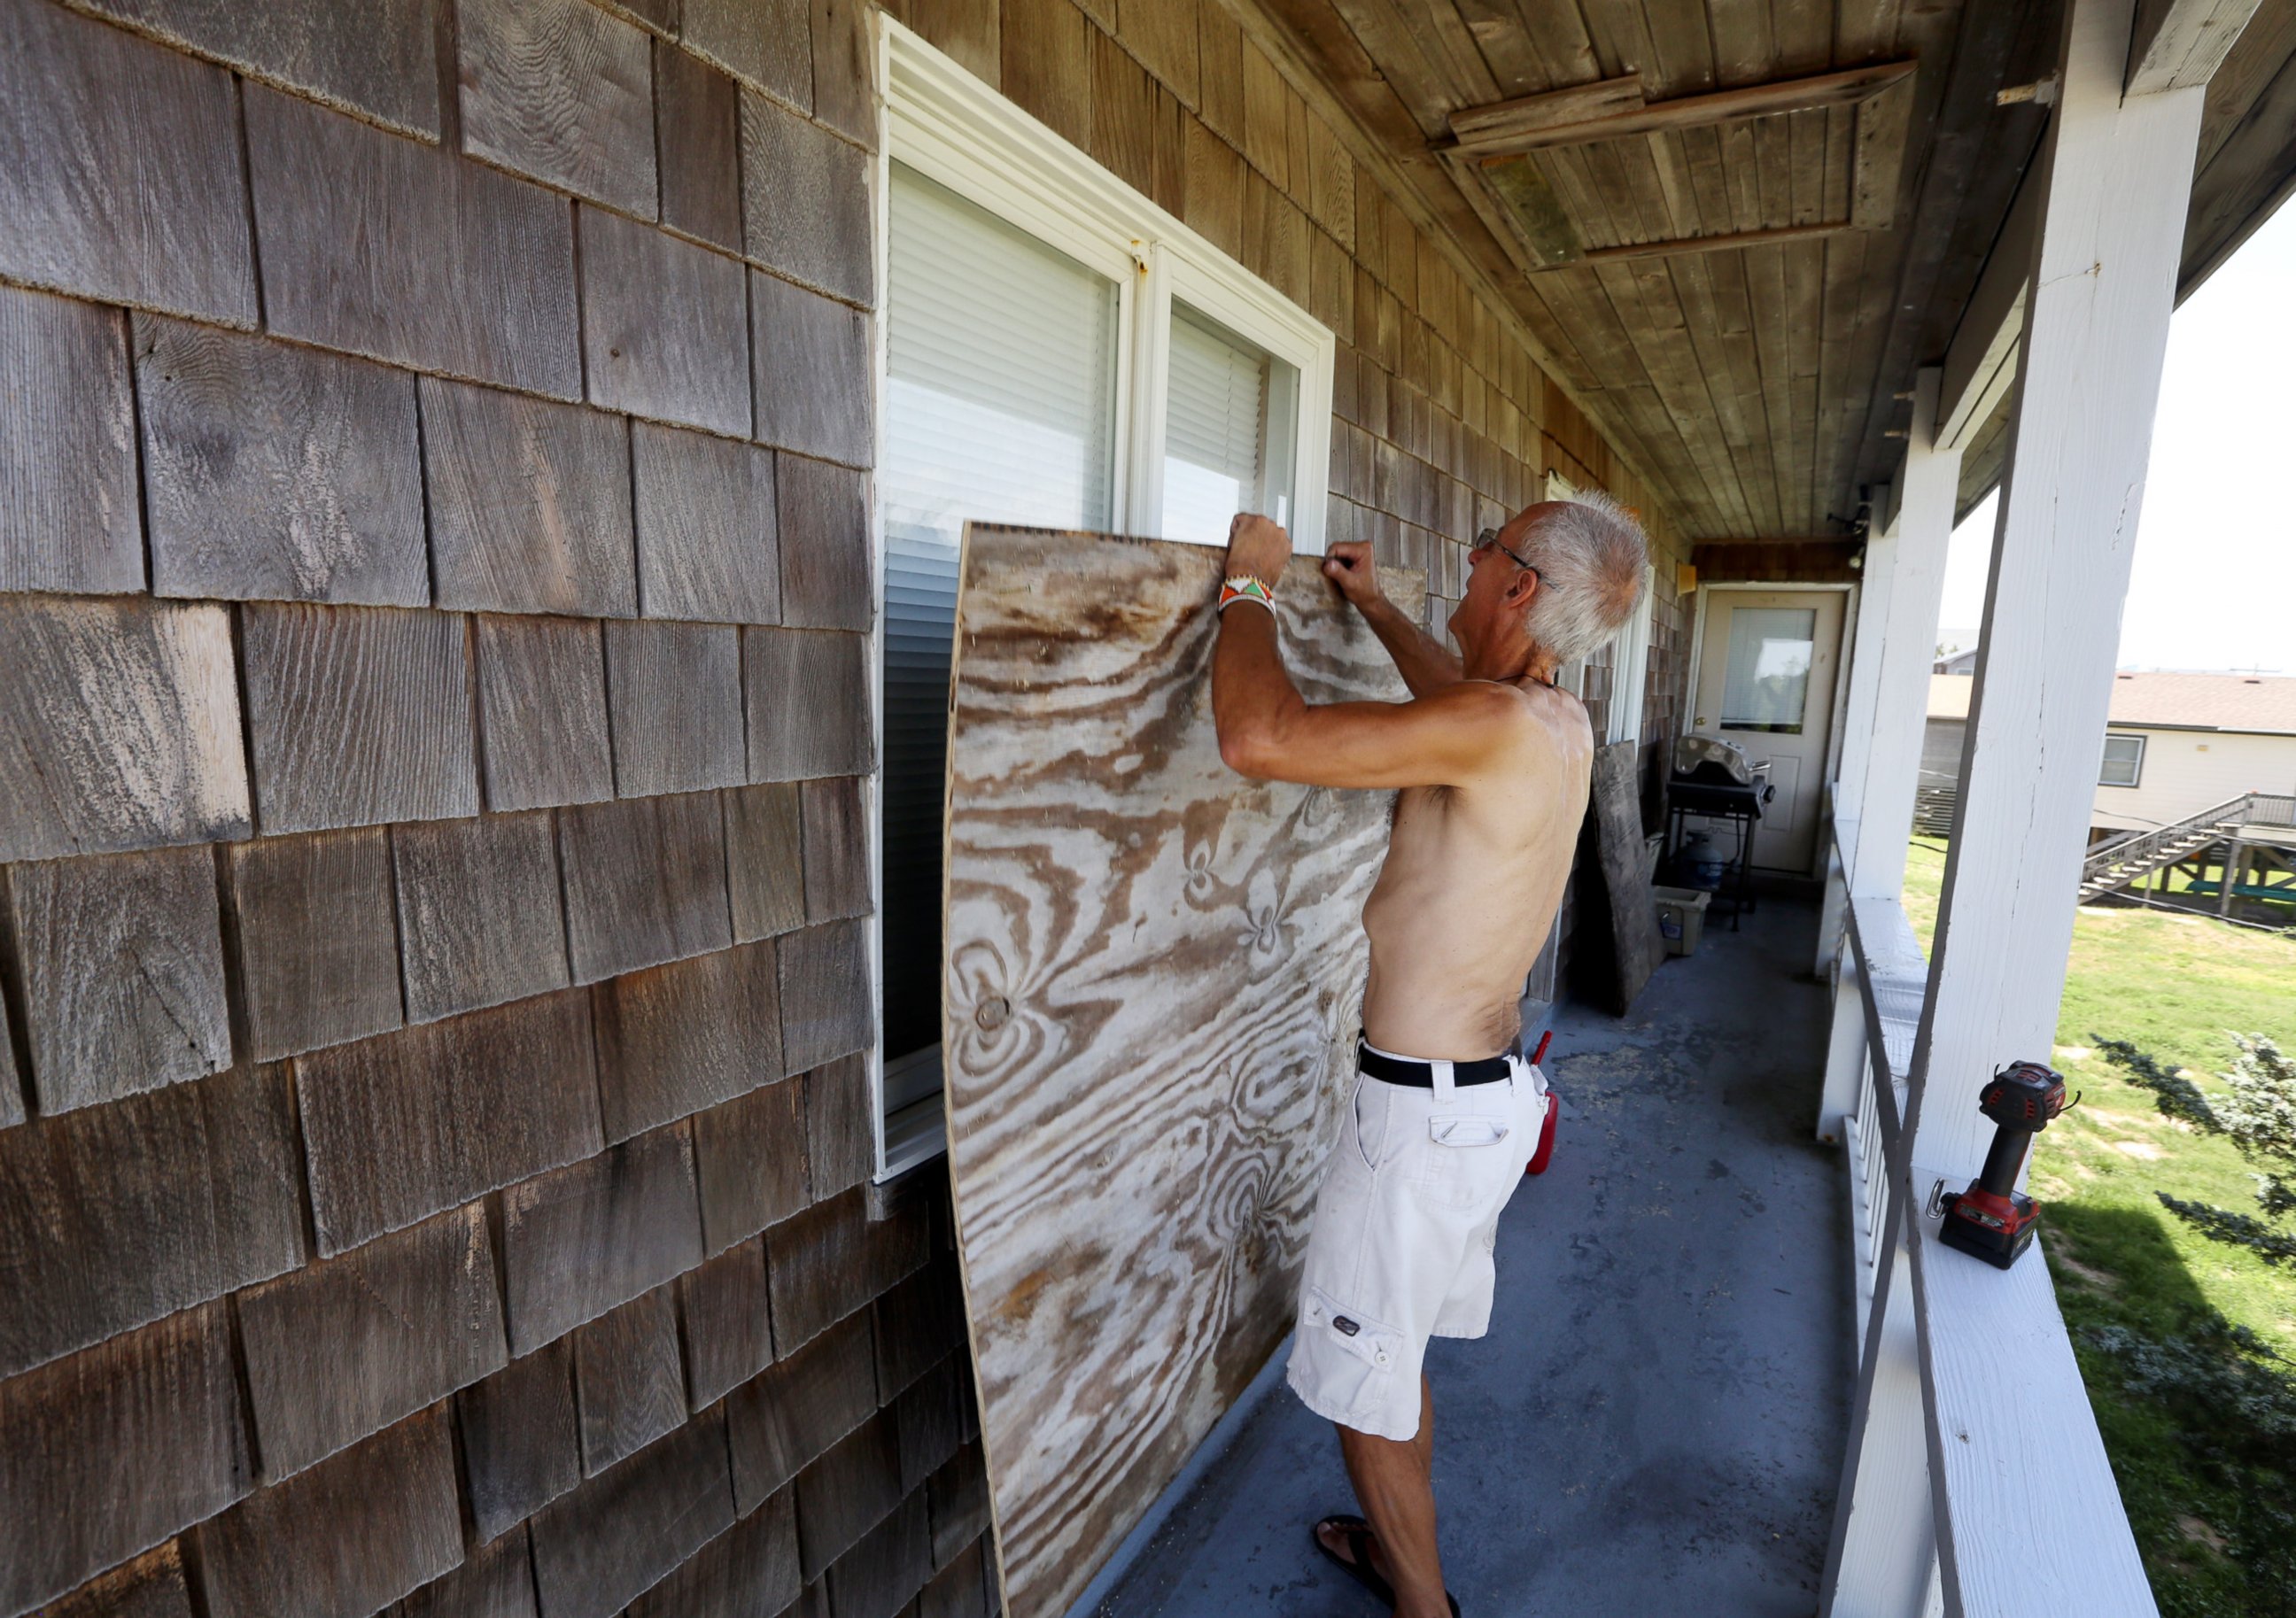 PHOTO: Peter LeWando puts plywood sheets over the windows of his apartment in Avon, N.C., July 3, 2014.